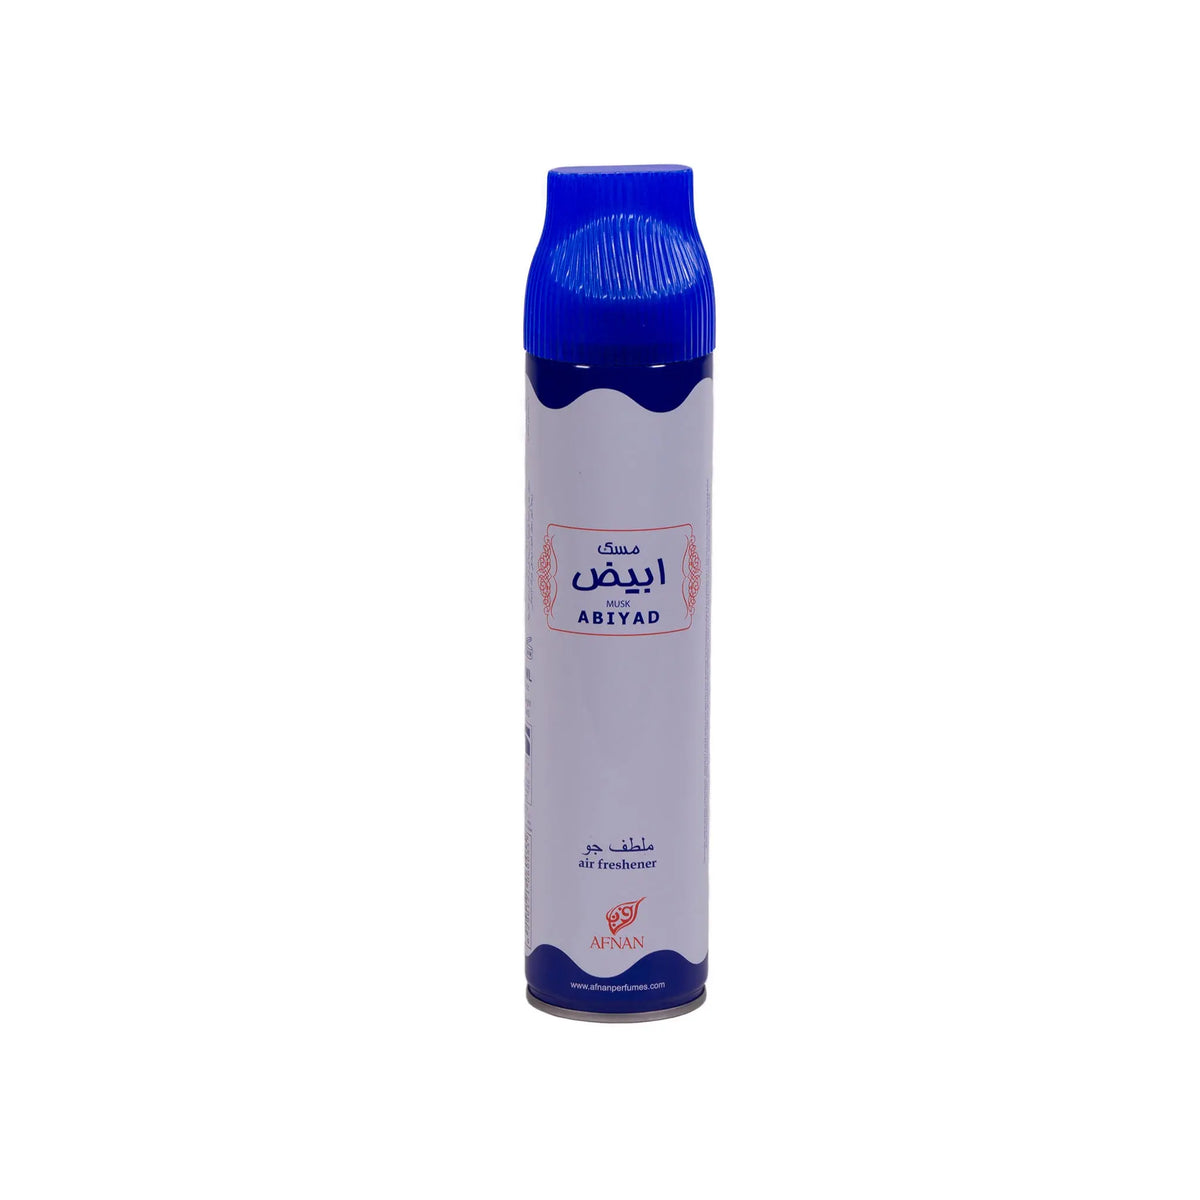 The image features a white aerosol air freshener can with a blue ribbed cap. It has "ABIYAD" in red text along with Arabic script, which translates as 'white' in English, likely indicating the fragrance name.  The design is simple with minimal color accents, primarily blue and red on a white background, creating a clean and straightforward appearance. The can is set against a light neutral background that doesn't distract from the product itself.